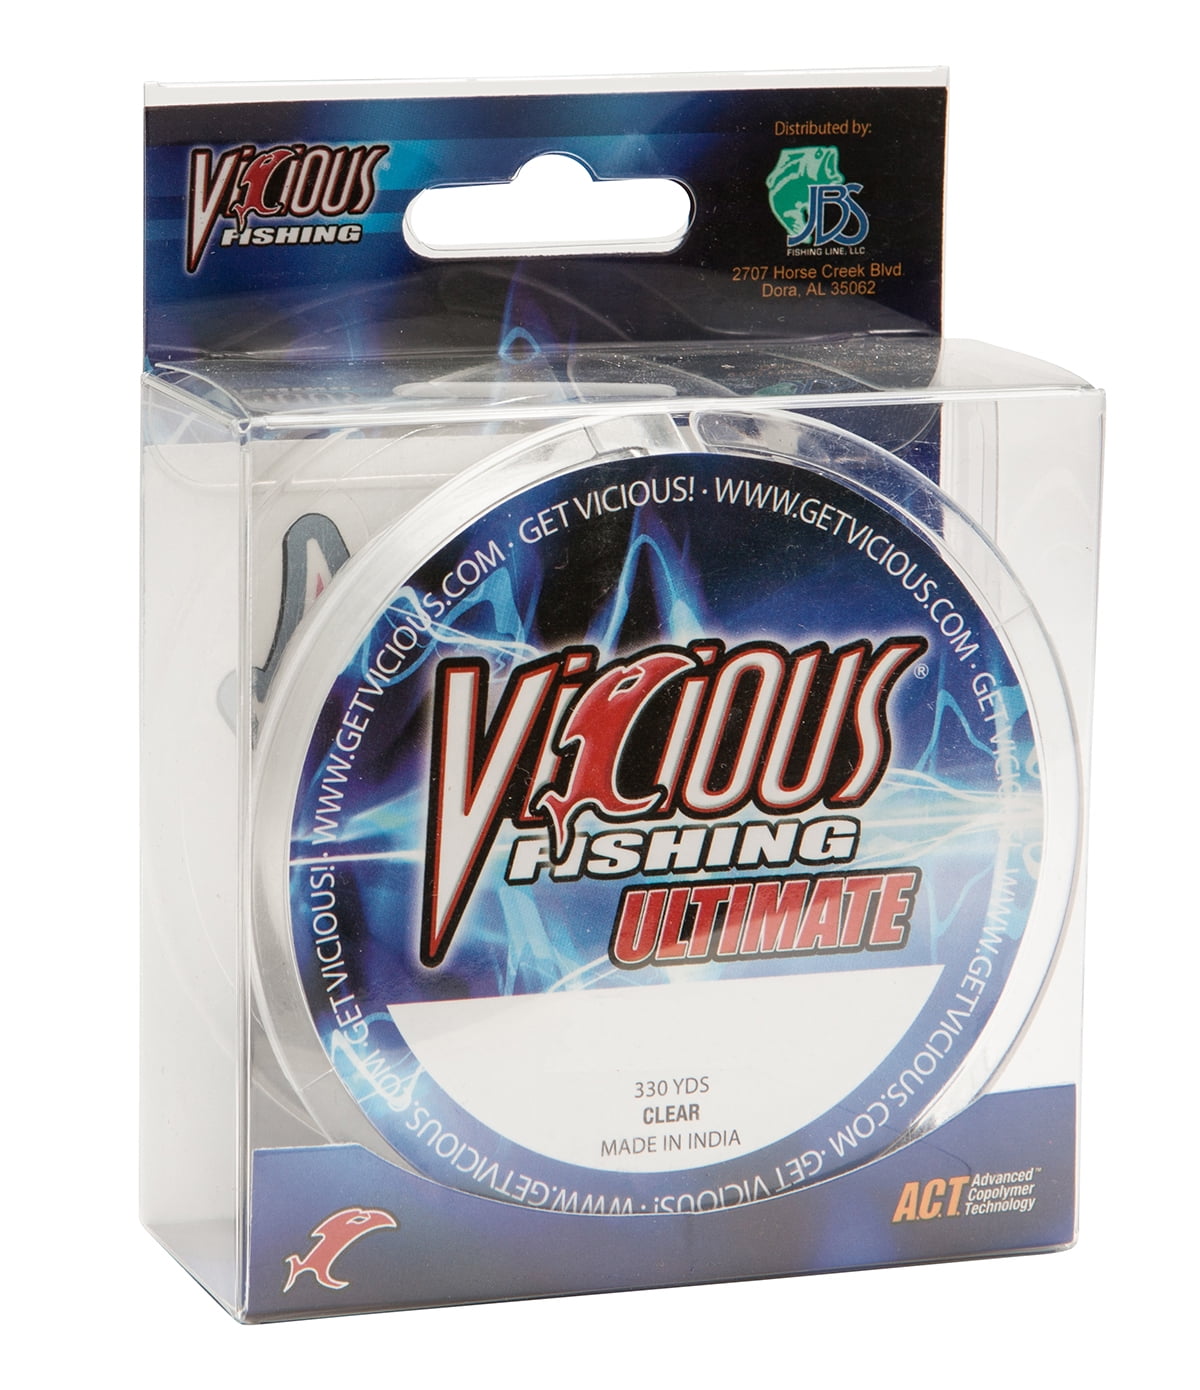 Vicious VCL12 Ultimate Fishing Line 12lb 330 Yards Clear New 